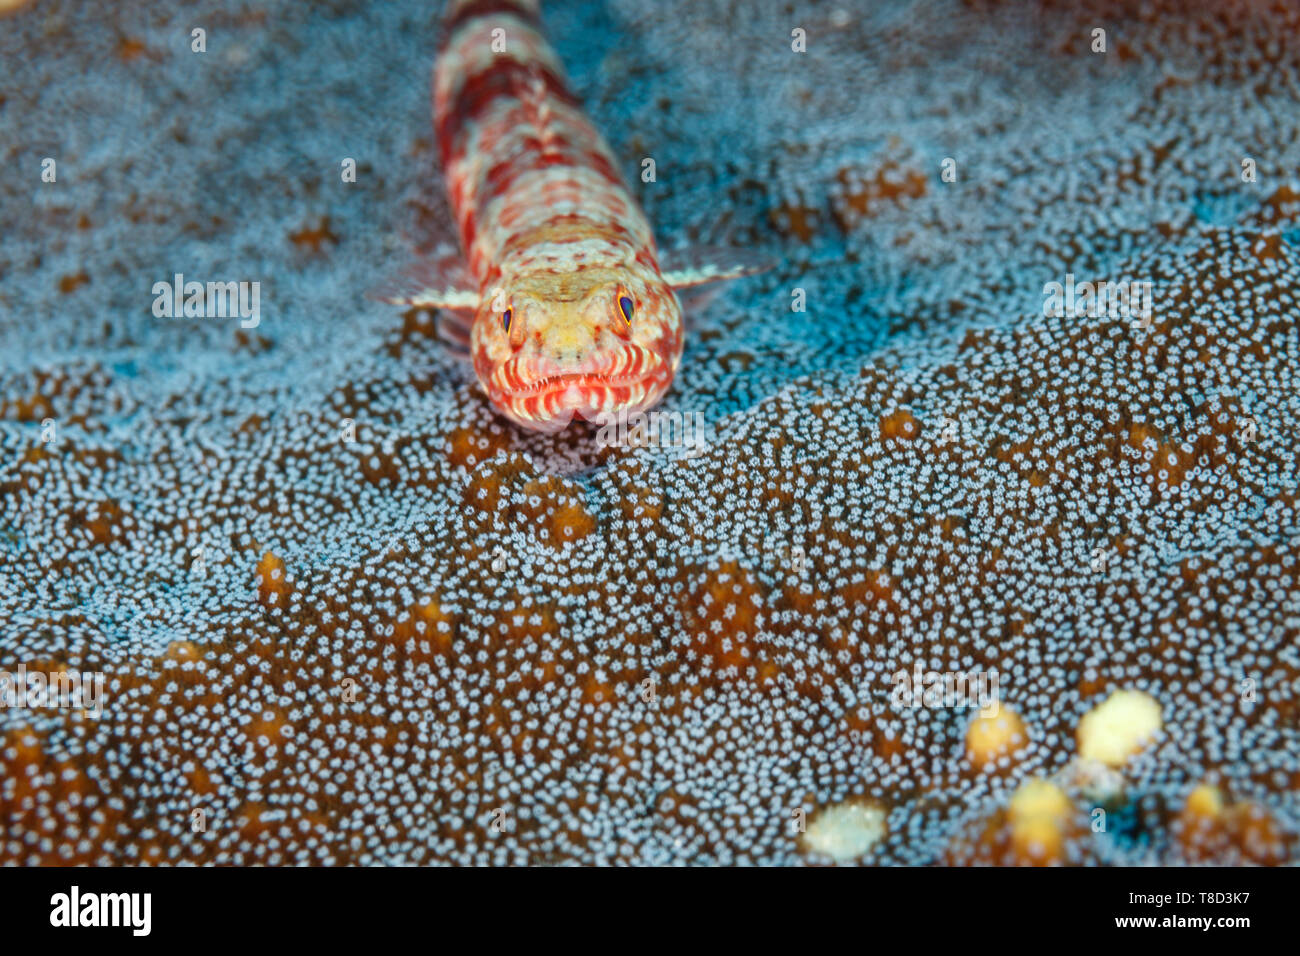 Striped Triplefin, Helcogramma striatum blenny hovers above staghorn coral polyps Stock Photo